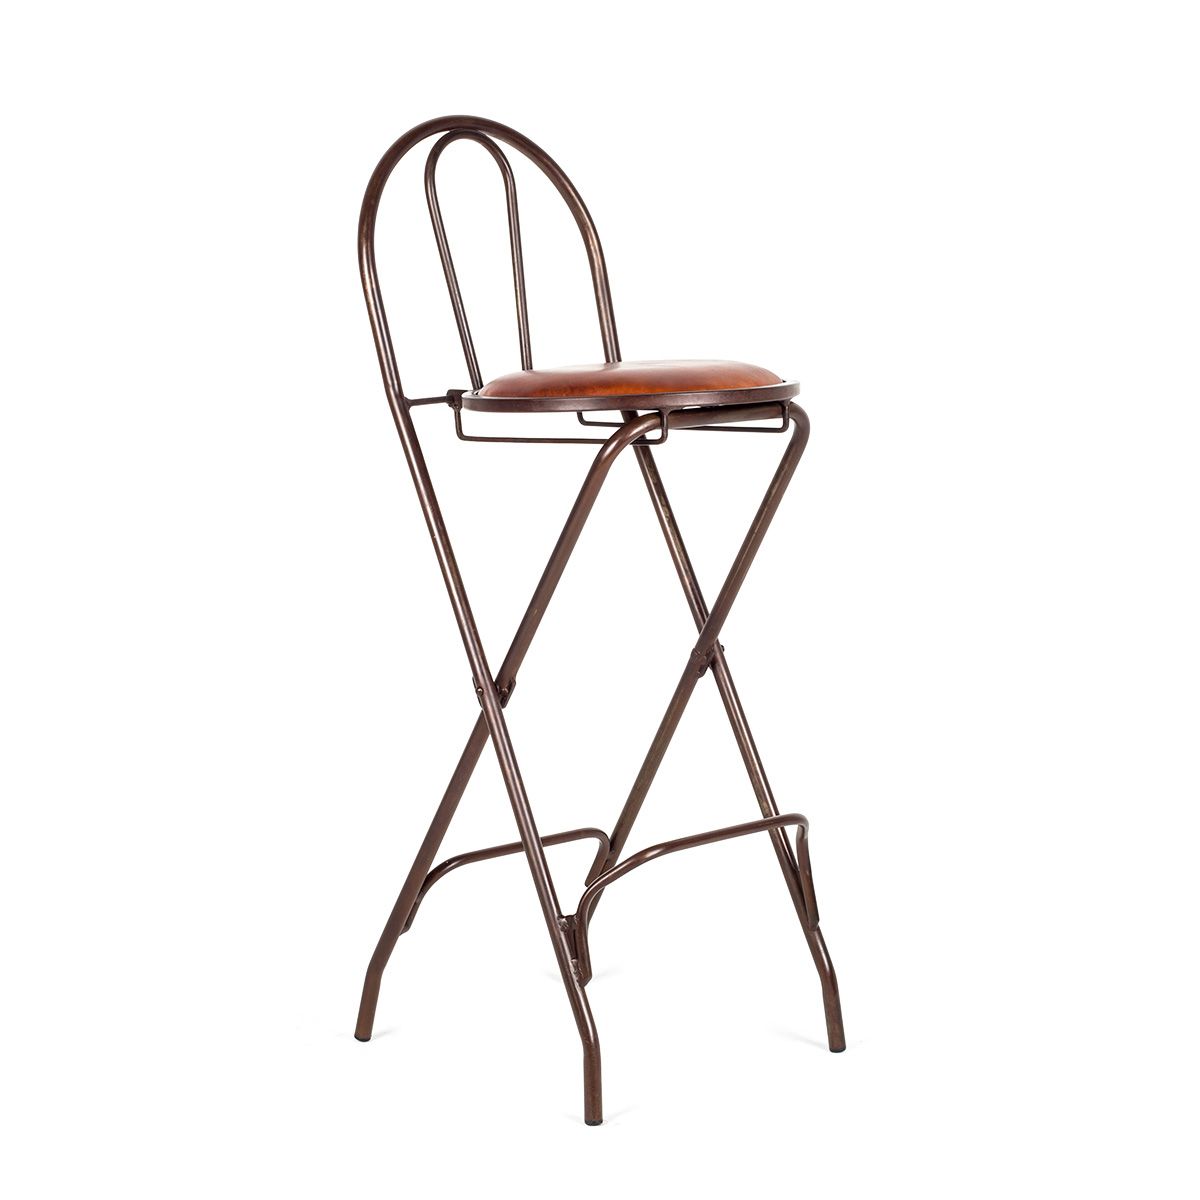 Best And Newest Medium Brown Leather Folding Stools Within Elegant Foldable Bar Stools, Seat Made Of Brown Leather (View 8 of 10)